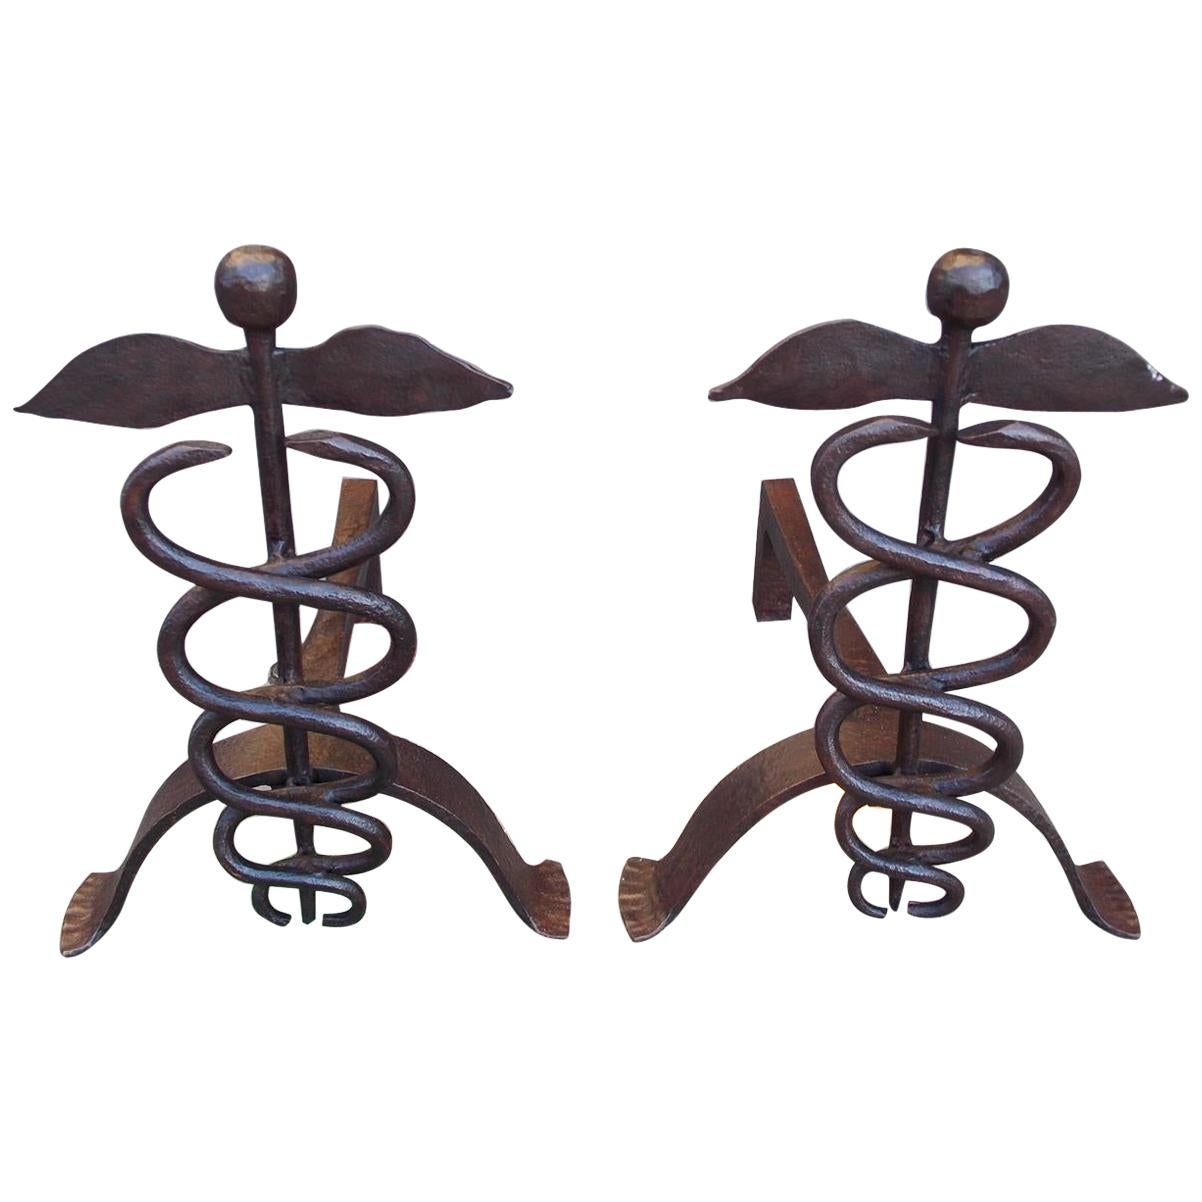 Pair of American Wrought Iron Finial Caduceus Andirons with Splayed Feet, C 1850 For Sale